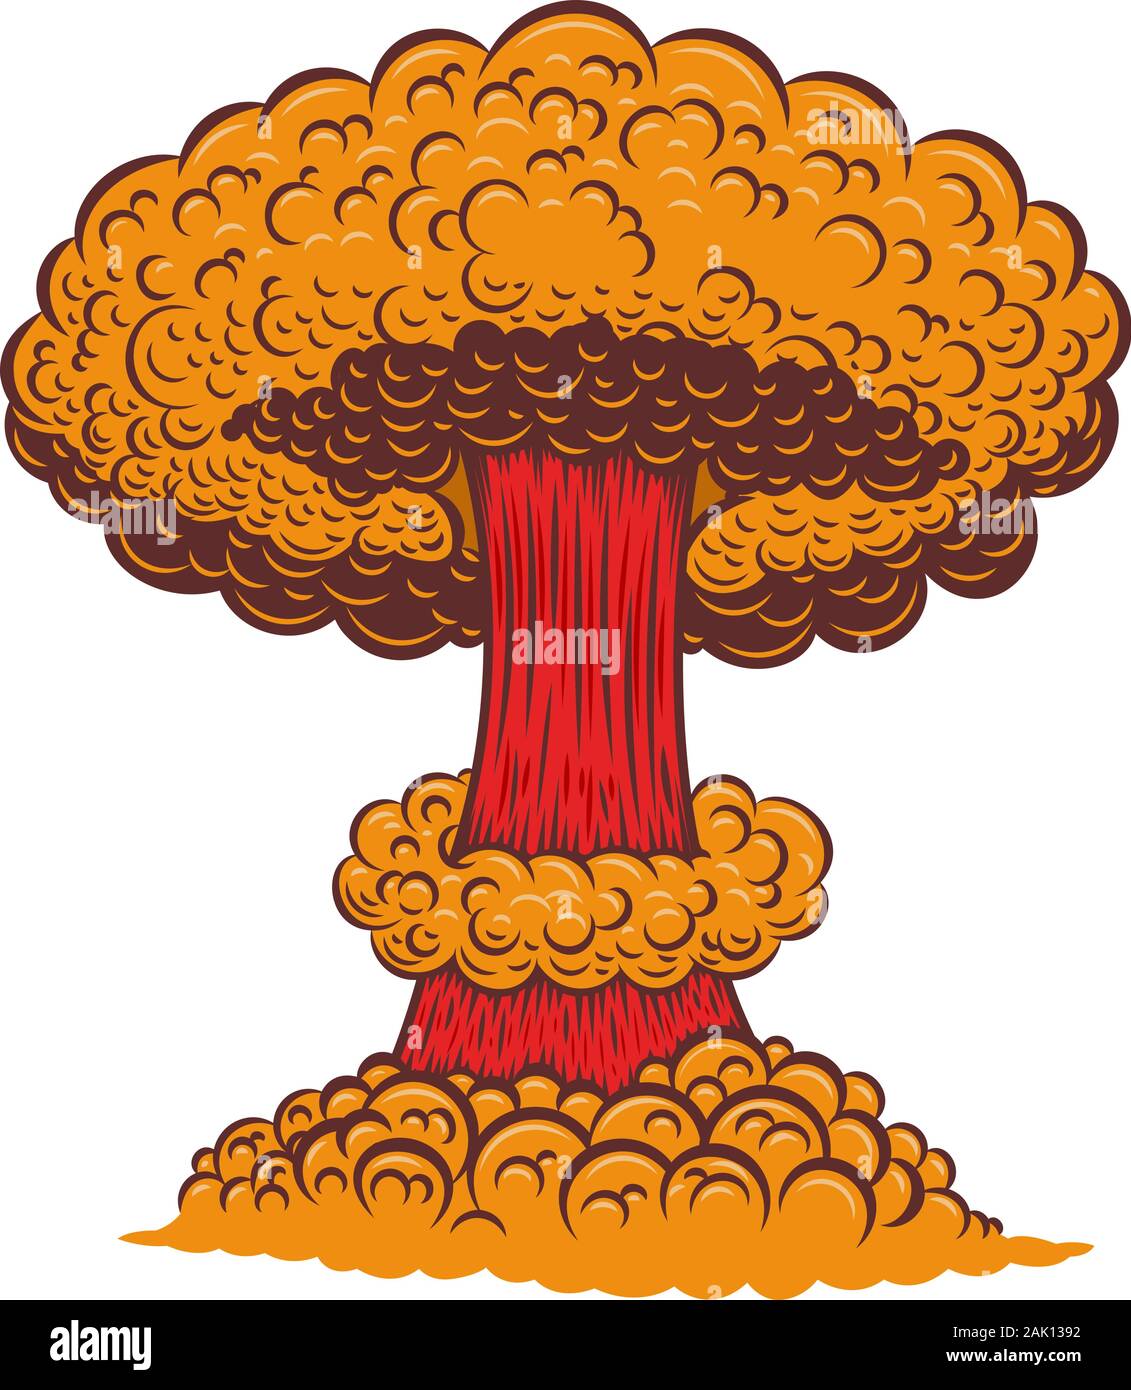 Bomb explosion Cut Out Stock Images & Pictures - Alamy